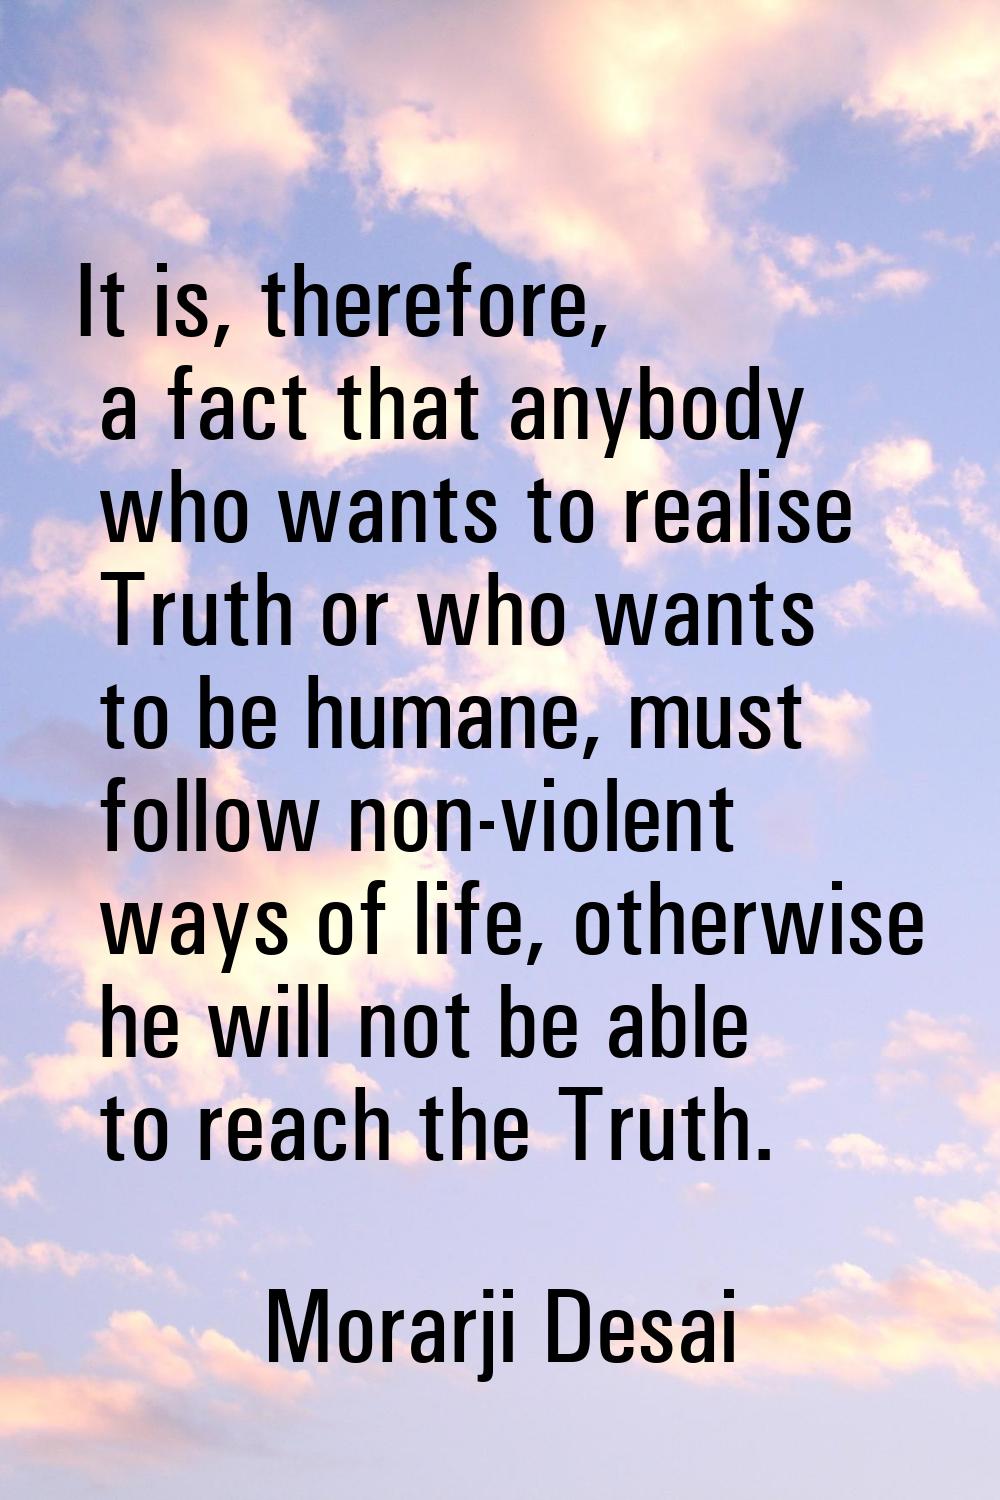 It is, therefore, a fact that anybody who wants to realise Truth or who wants to be humane, must fo